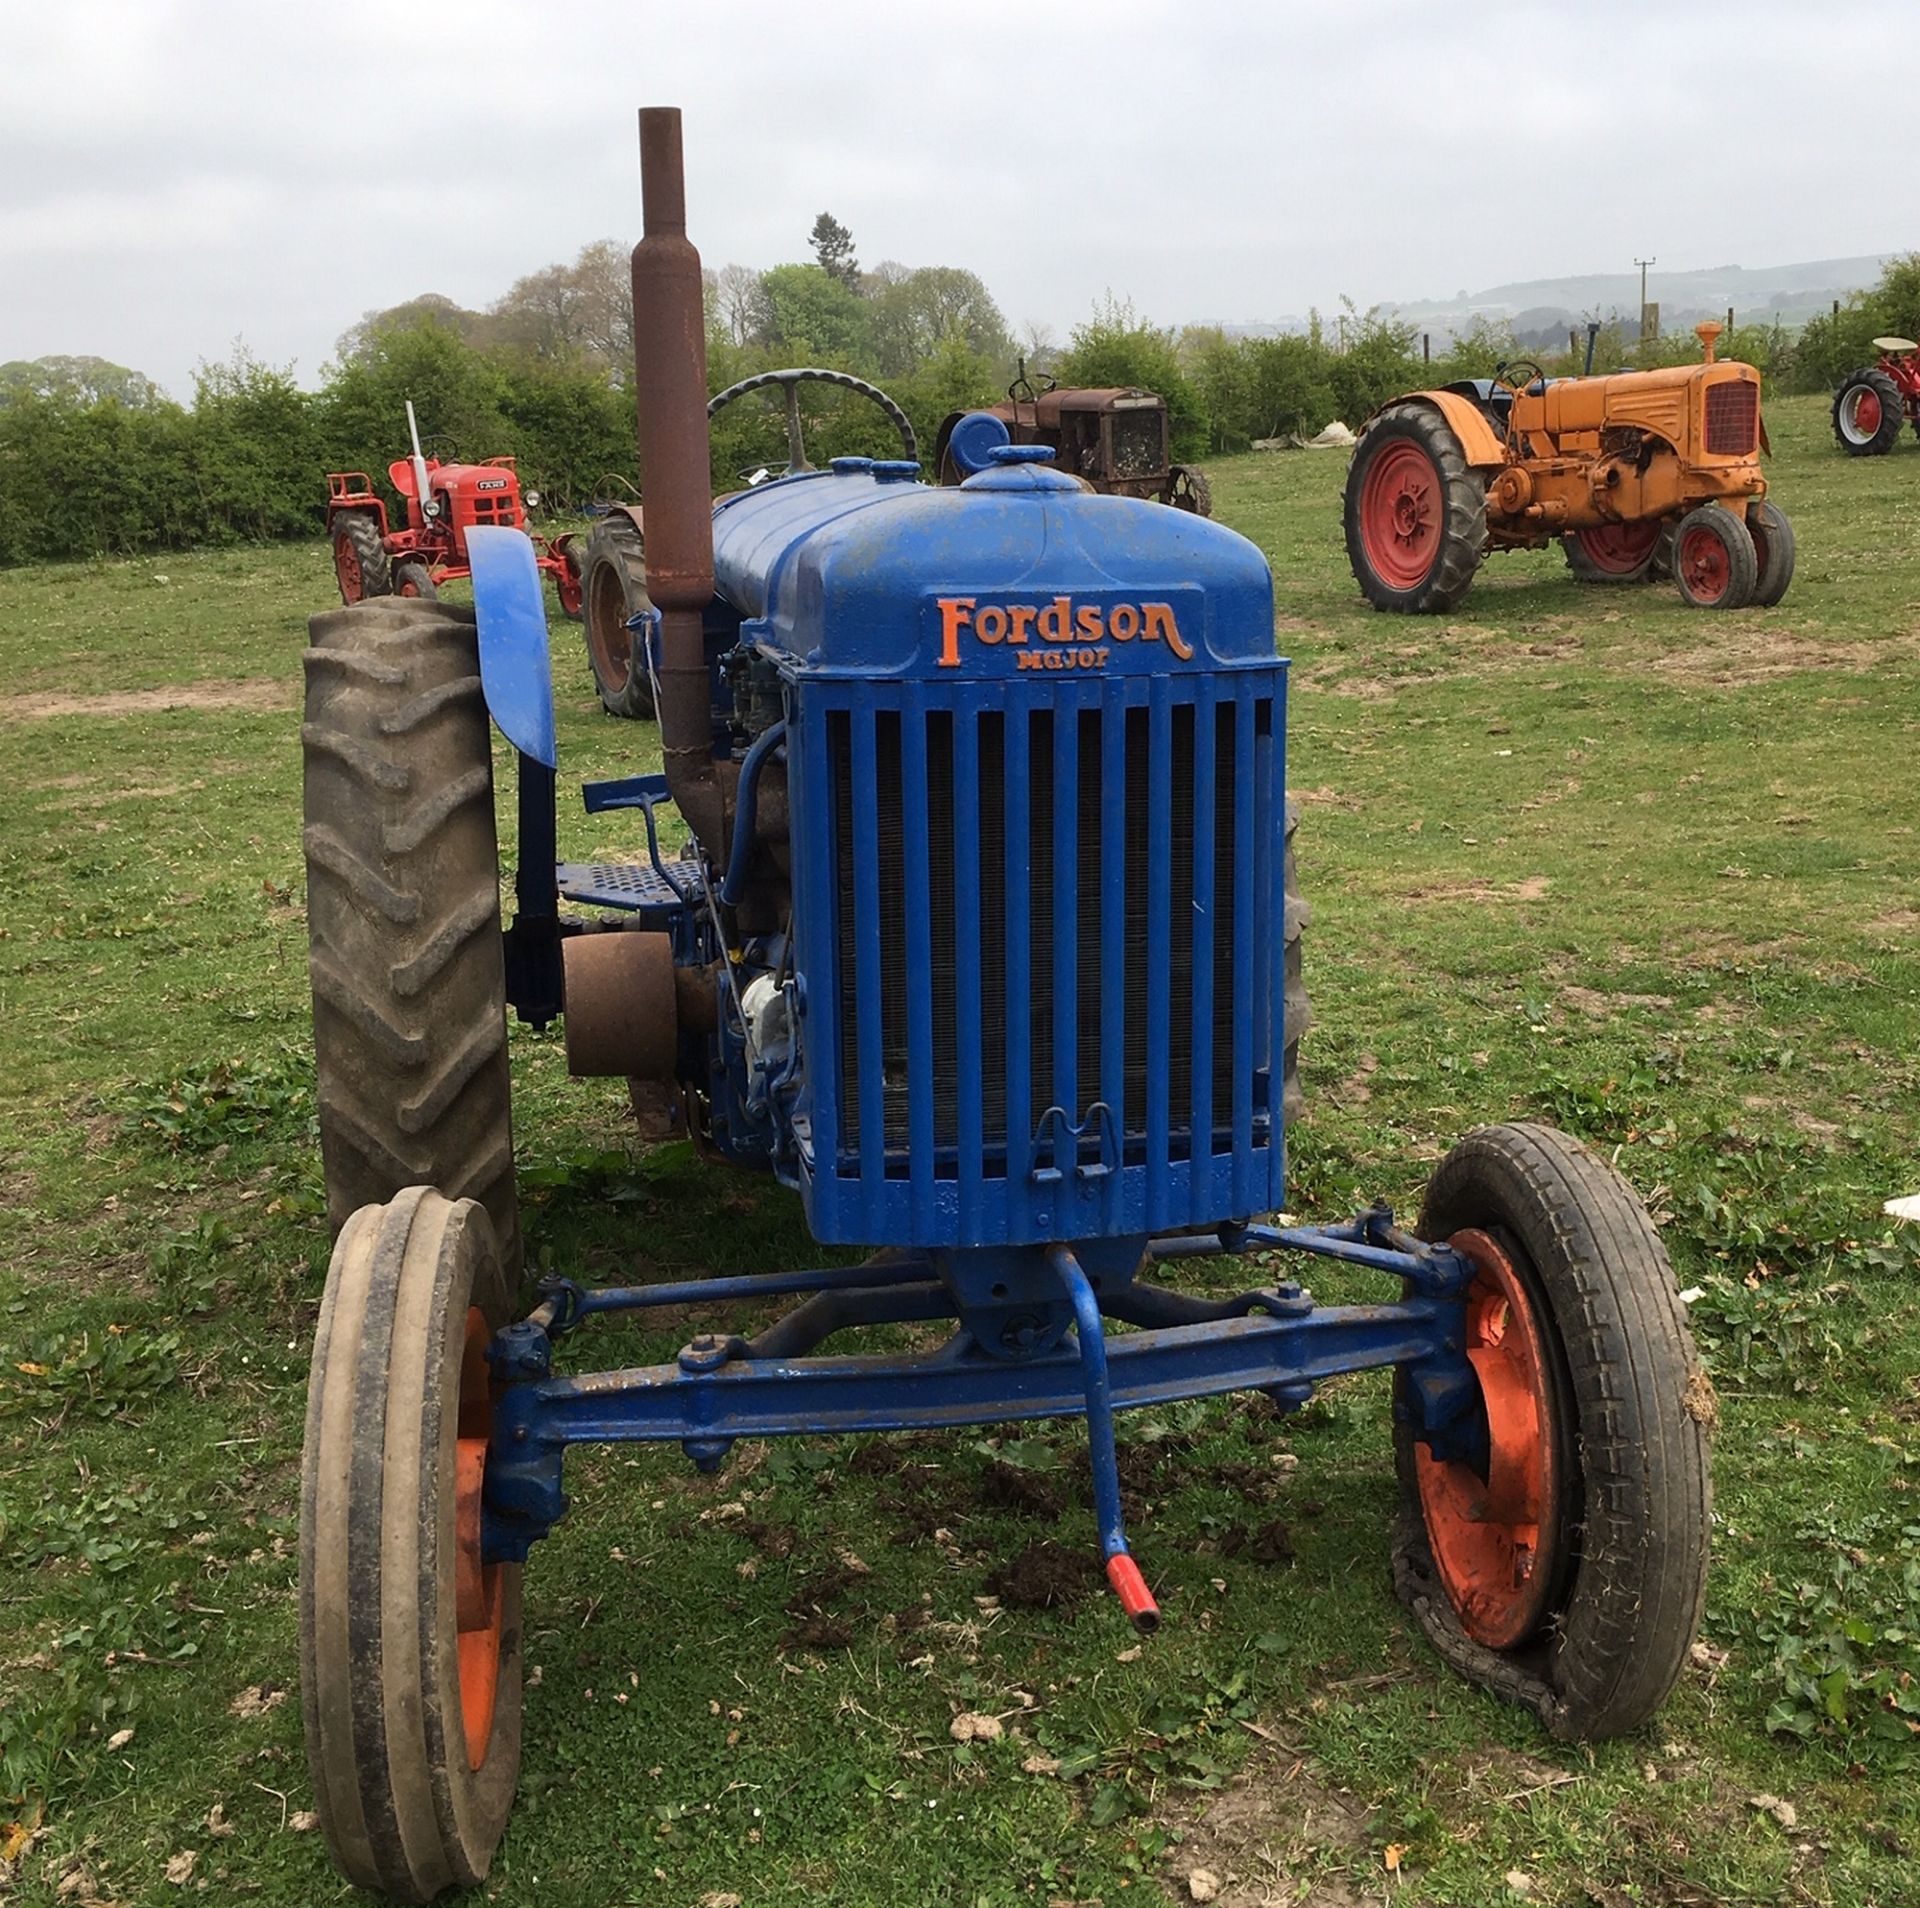 Fordson E27N Petrol/Paraffin Tractor. - Image 3 of 4